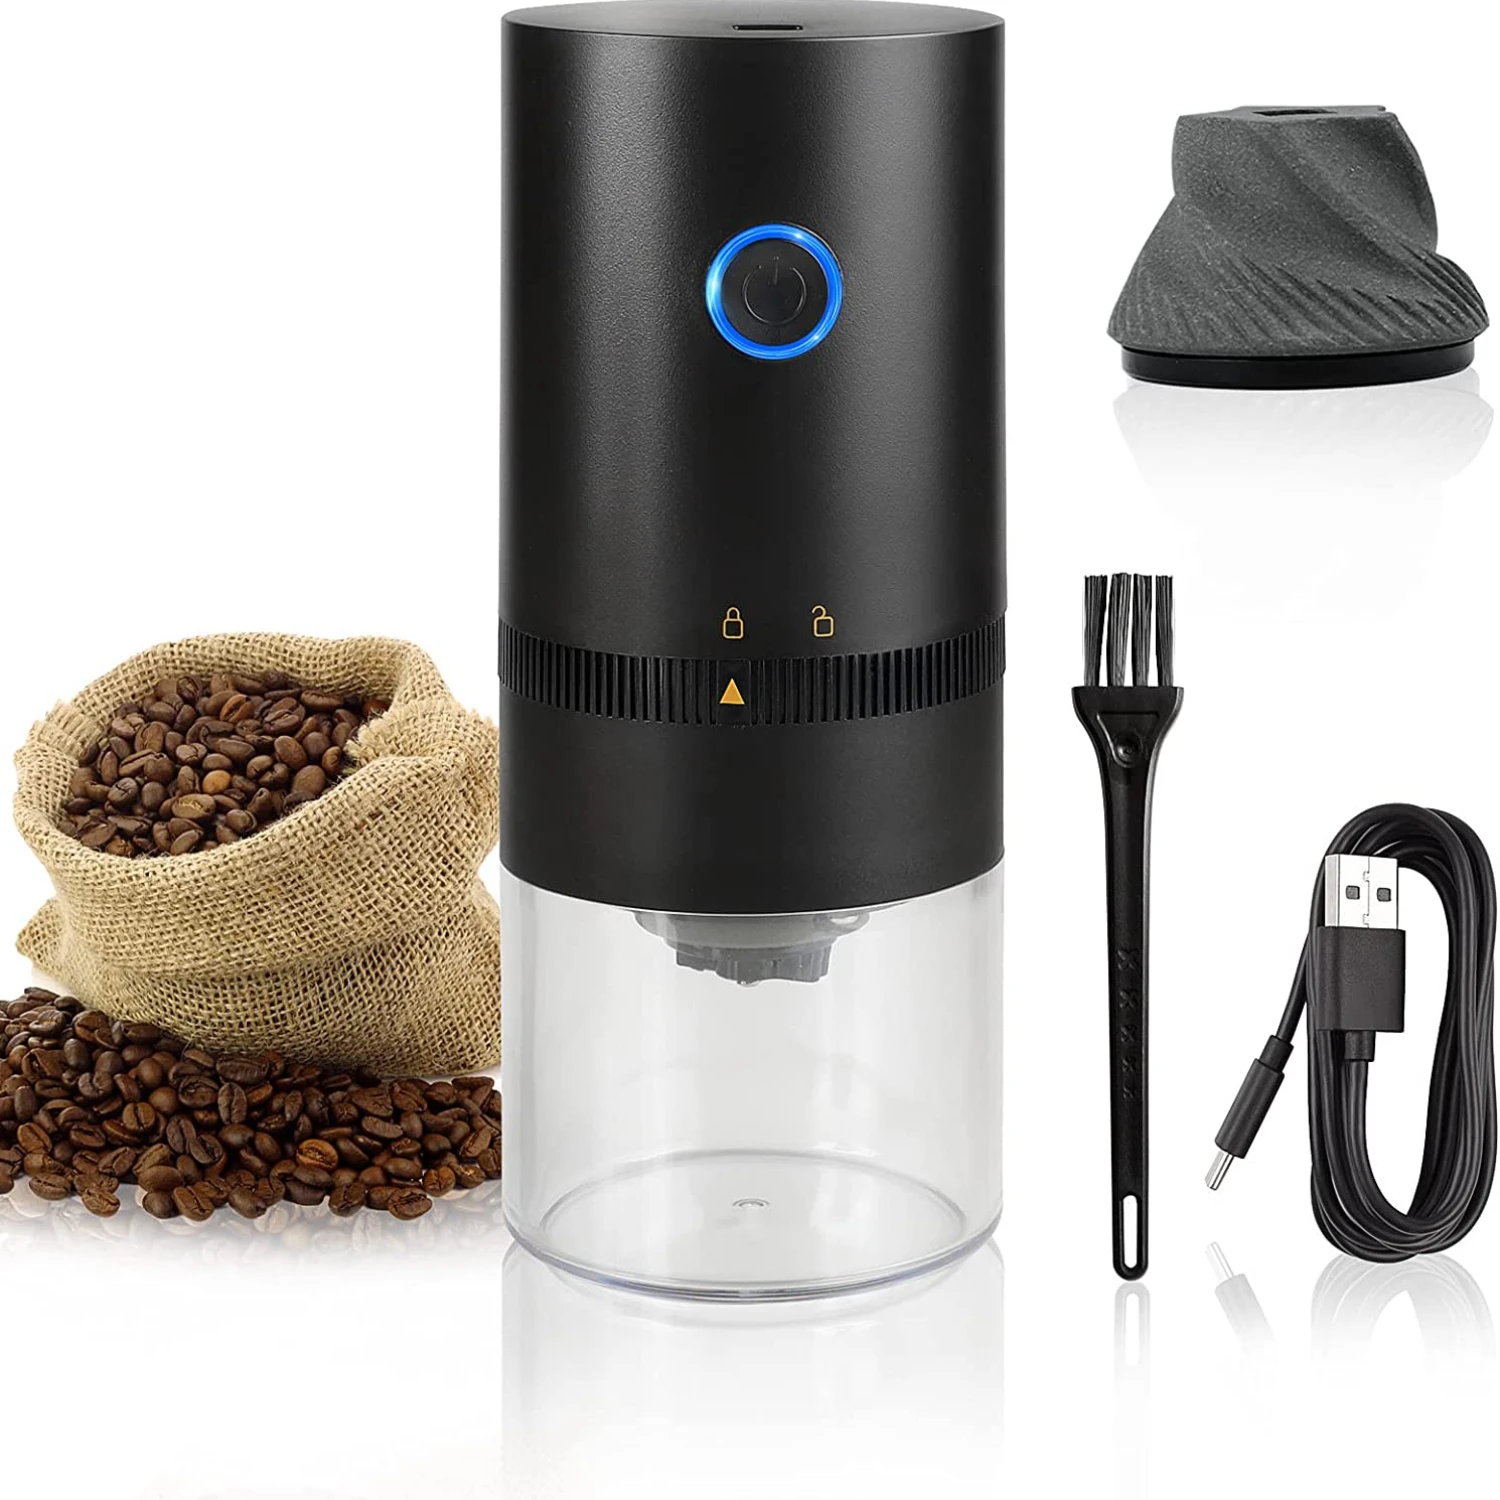 

New Upgrade Portable Electric Coffee Grinder TYPE-C USB Charge Profession Ceramic Grinding Core Coffee Beans Mill Grinder